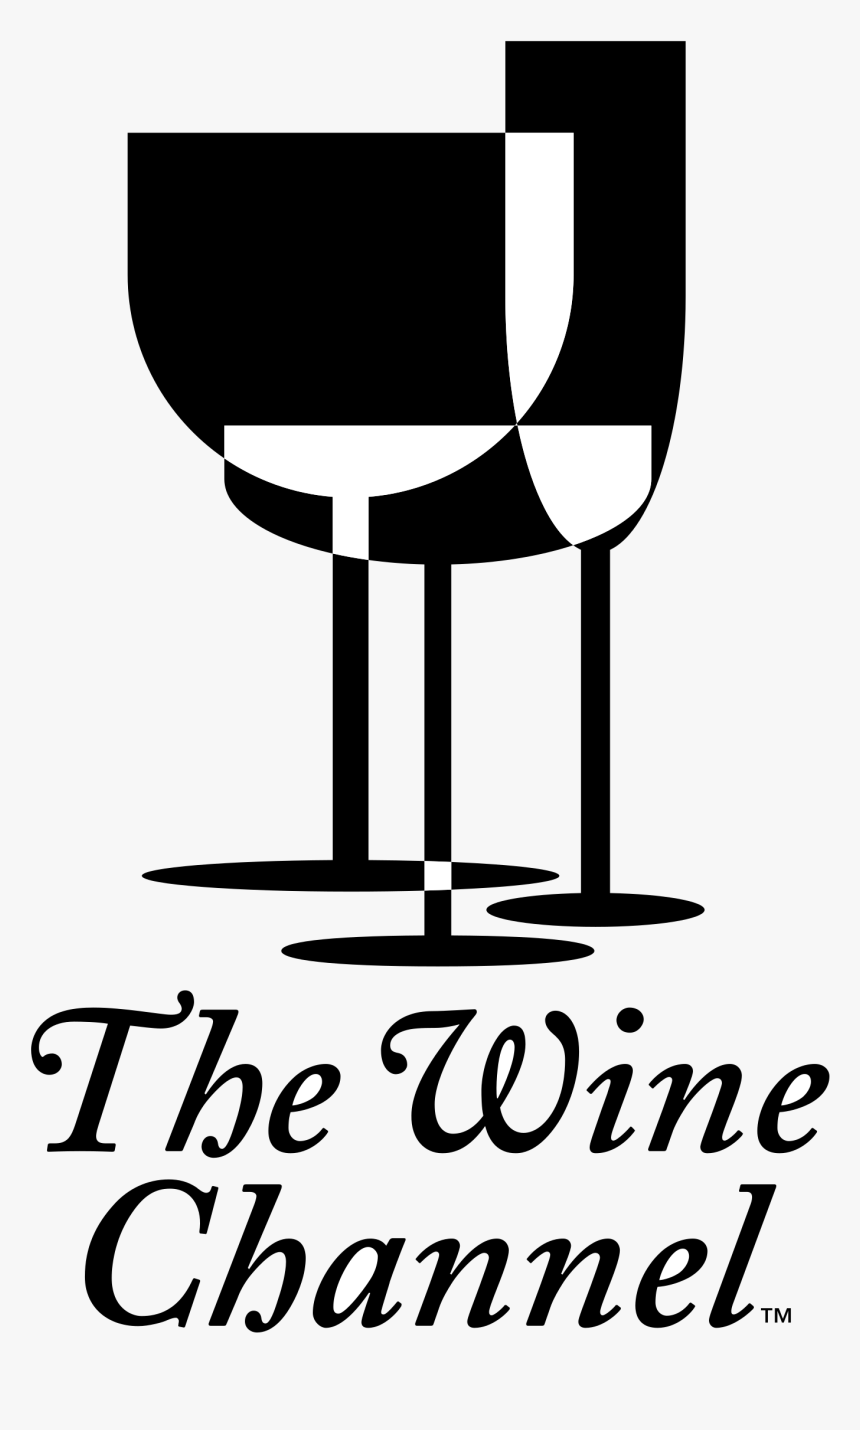 The Wine Channel Logo Png Transparent - Guinness, Png Download, Free Download